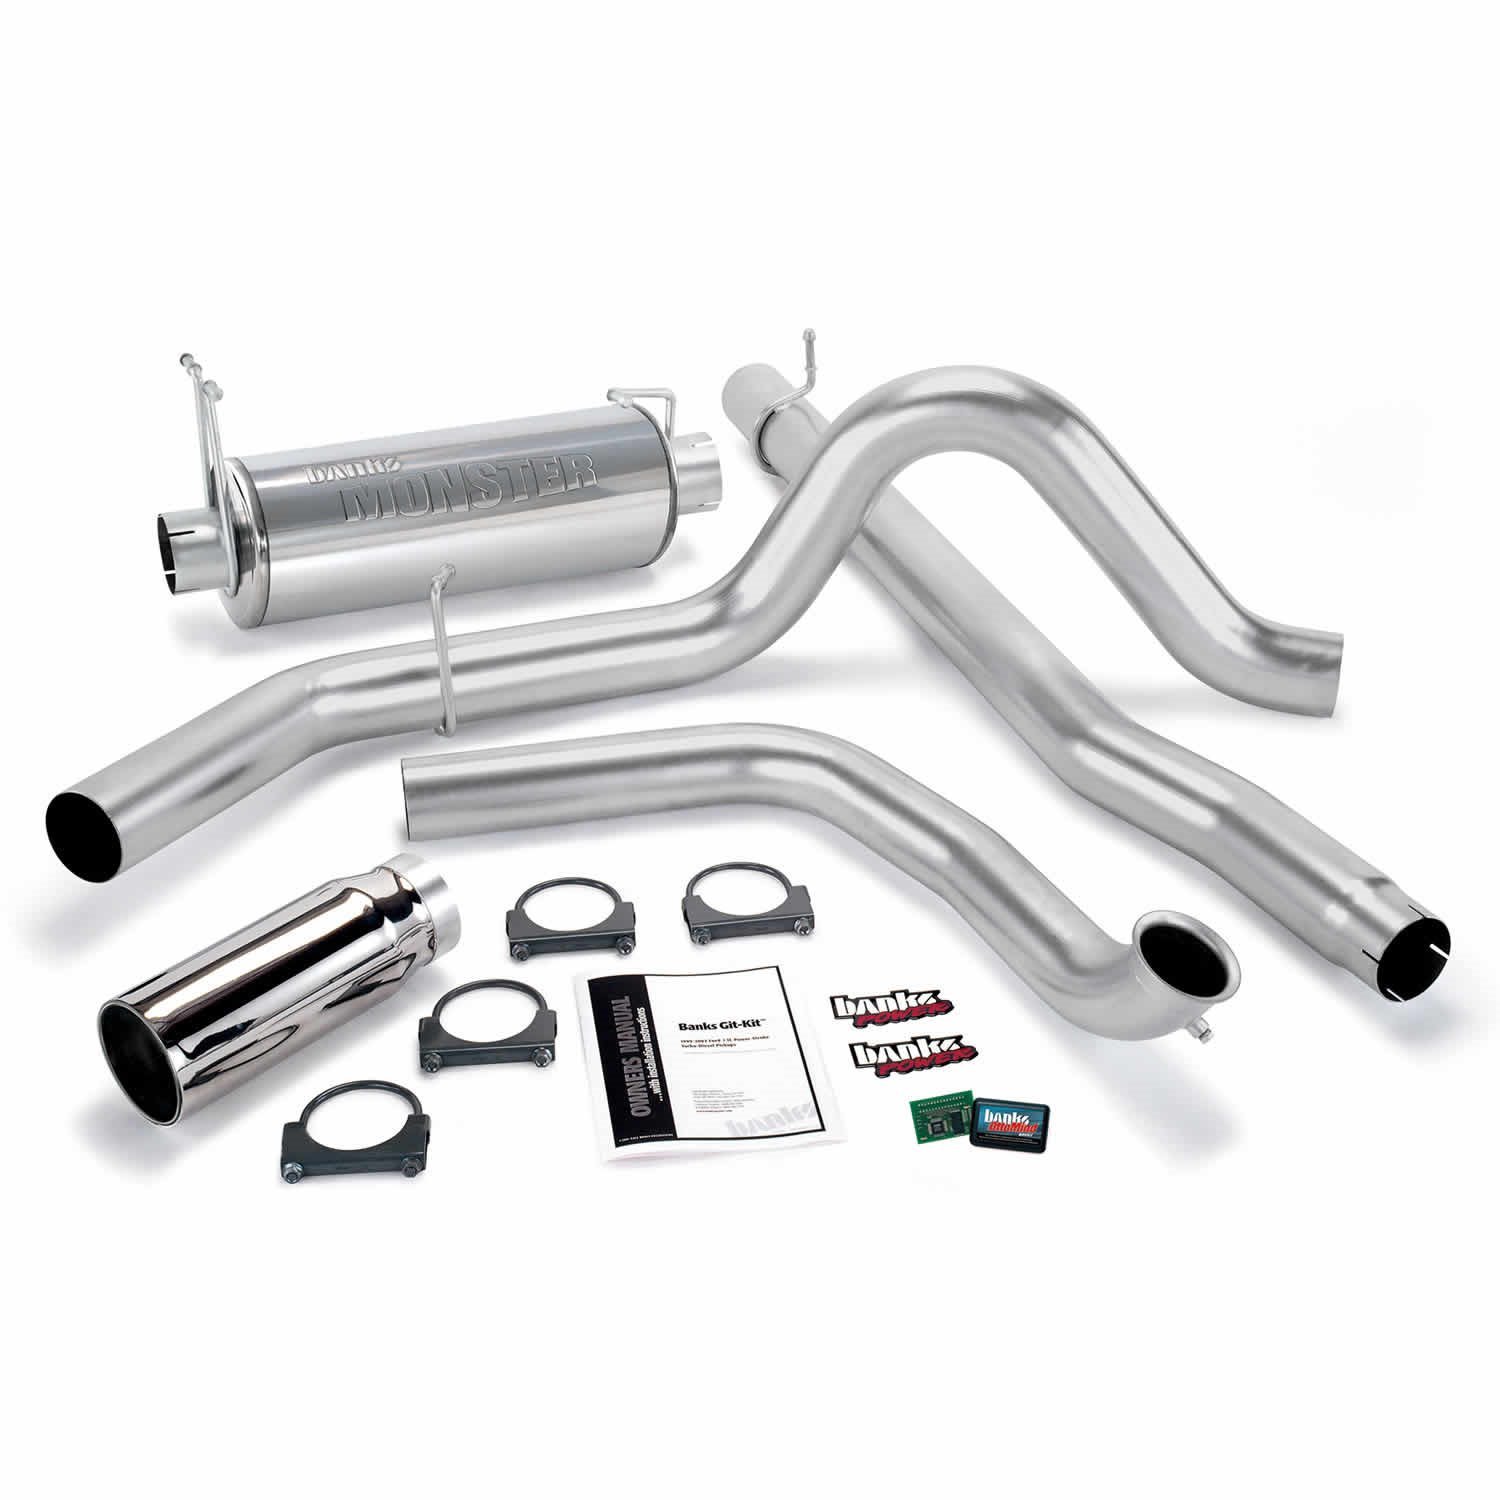 Git-Kit Exhaust System 2000-03 Ford Excursion 7.3L Powerstroke